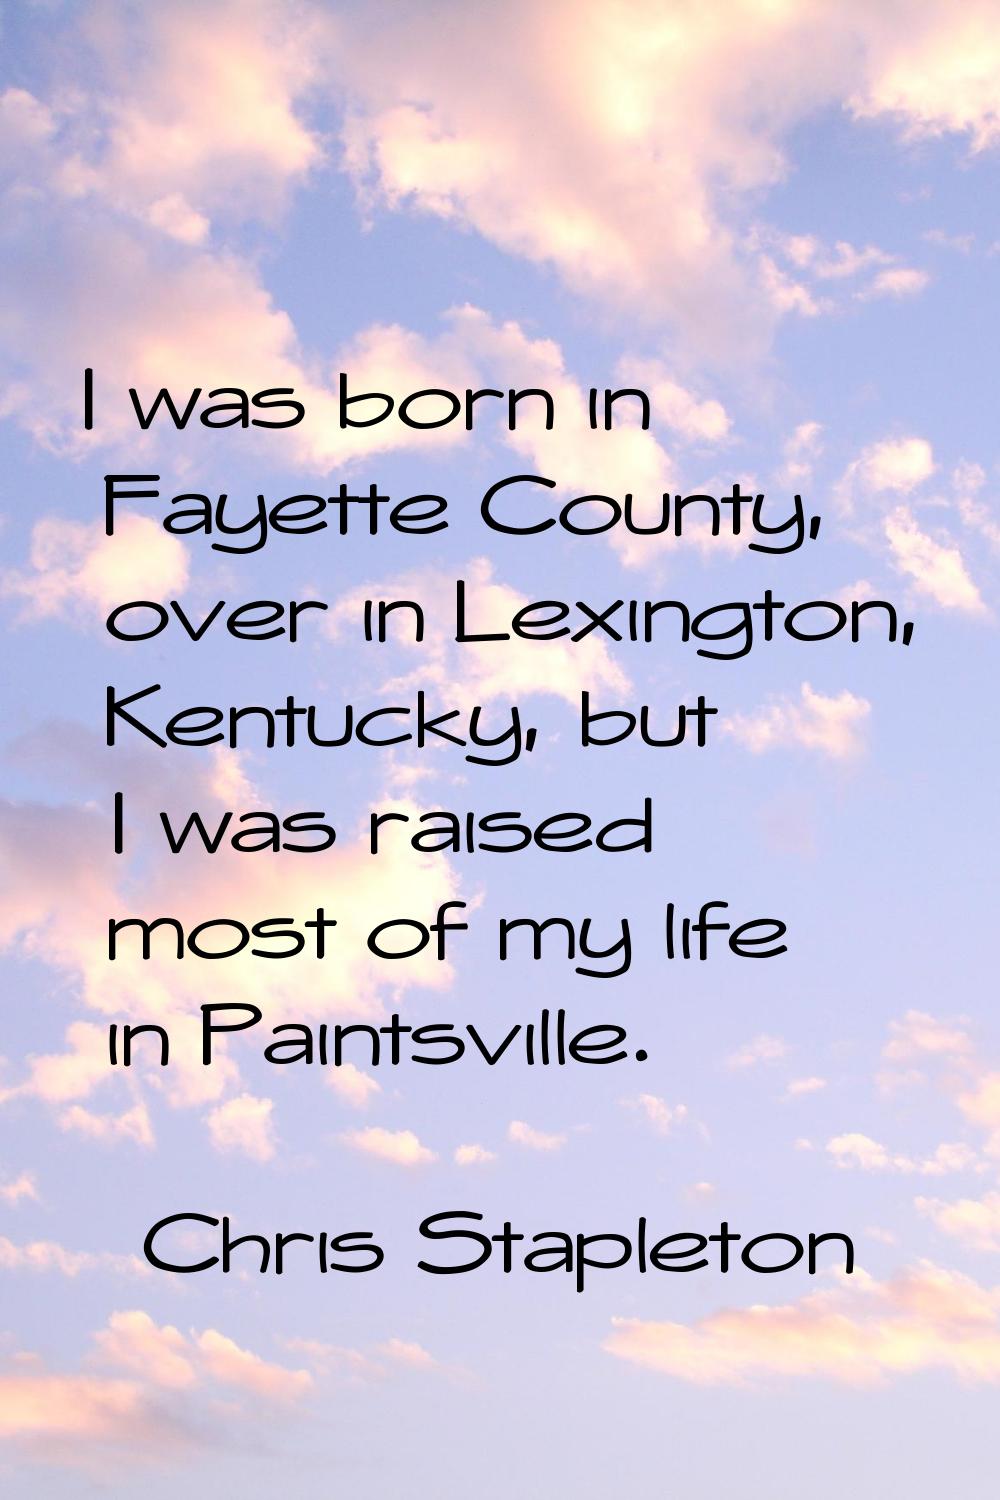 I was born in Fayette County, over in Lexington, Kentucky, but I was raised most of my life in Pain